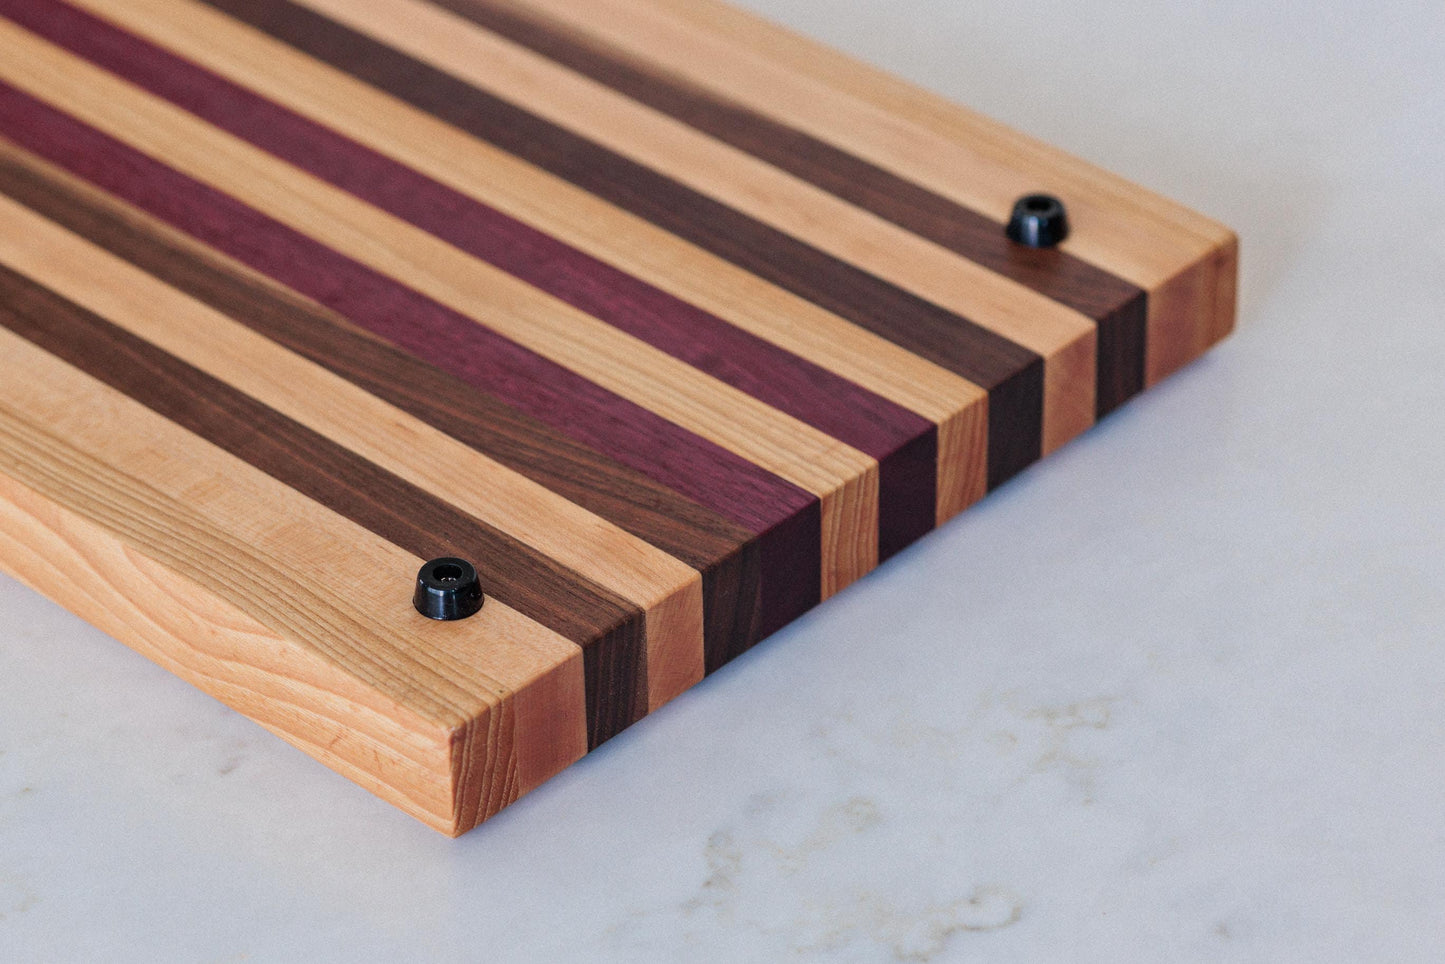 Large Hardwood cutting board with juice groove! Walnut, purple heart, hickory, hard maple, and cherry. 17"x10.5"x1.5"